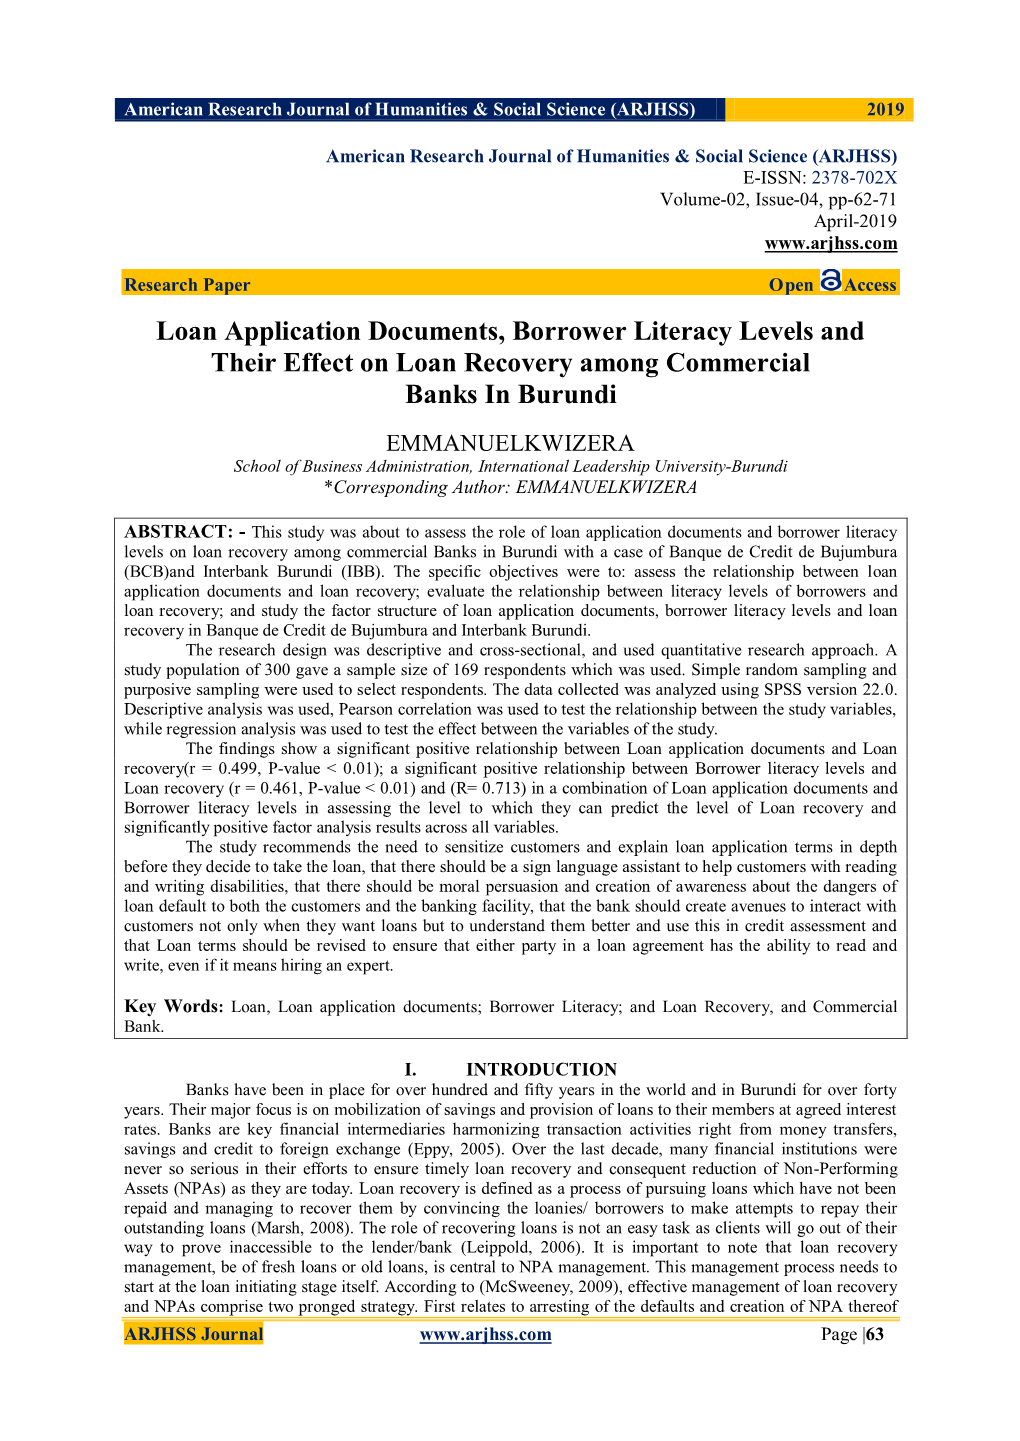 Loan Application Documents, Borrower Literacy Levels and Their Effect on Loan Recovery Among Commercial Banks in Burundi